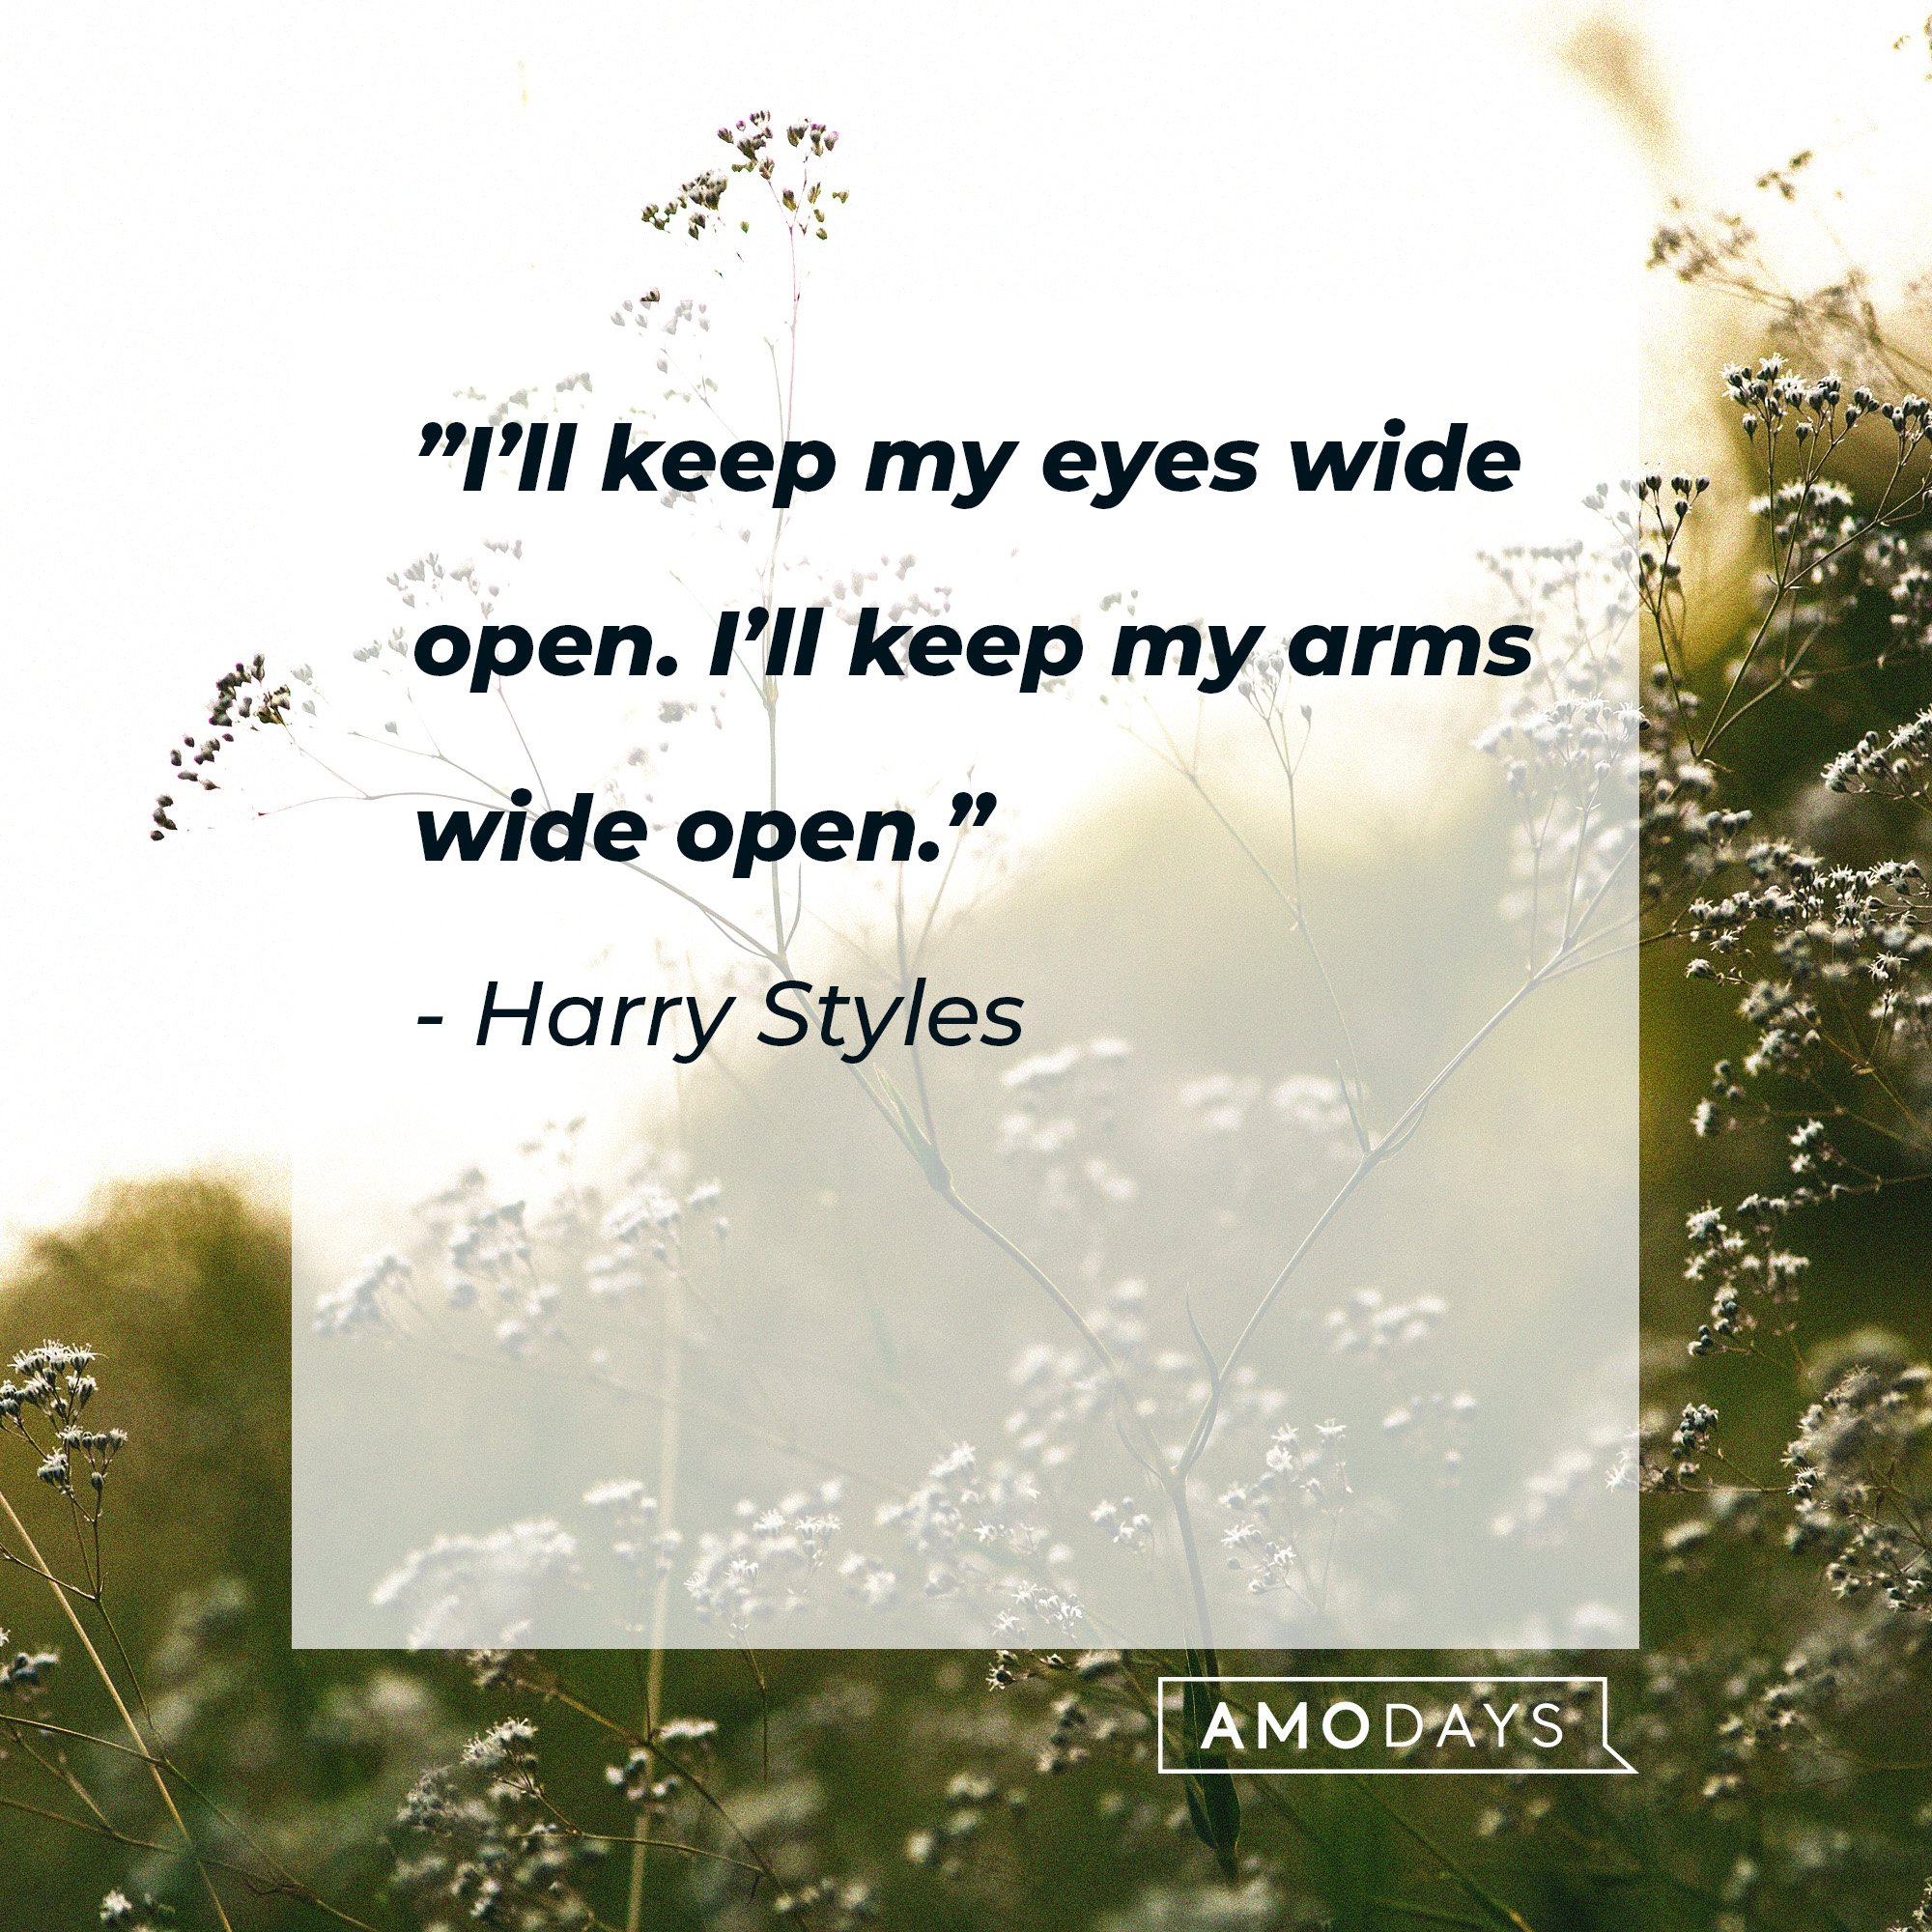 Harry Styles’ quote: "I’ll keep my eyes wide open. I’ll keep my arms wide open." | Source: AmoDays